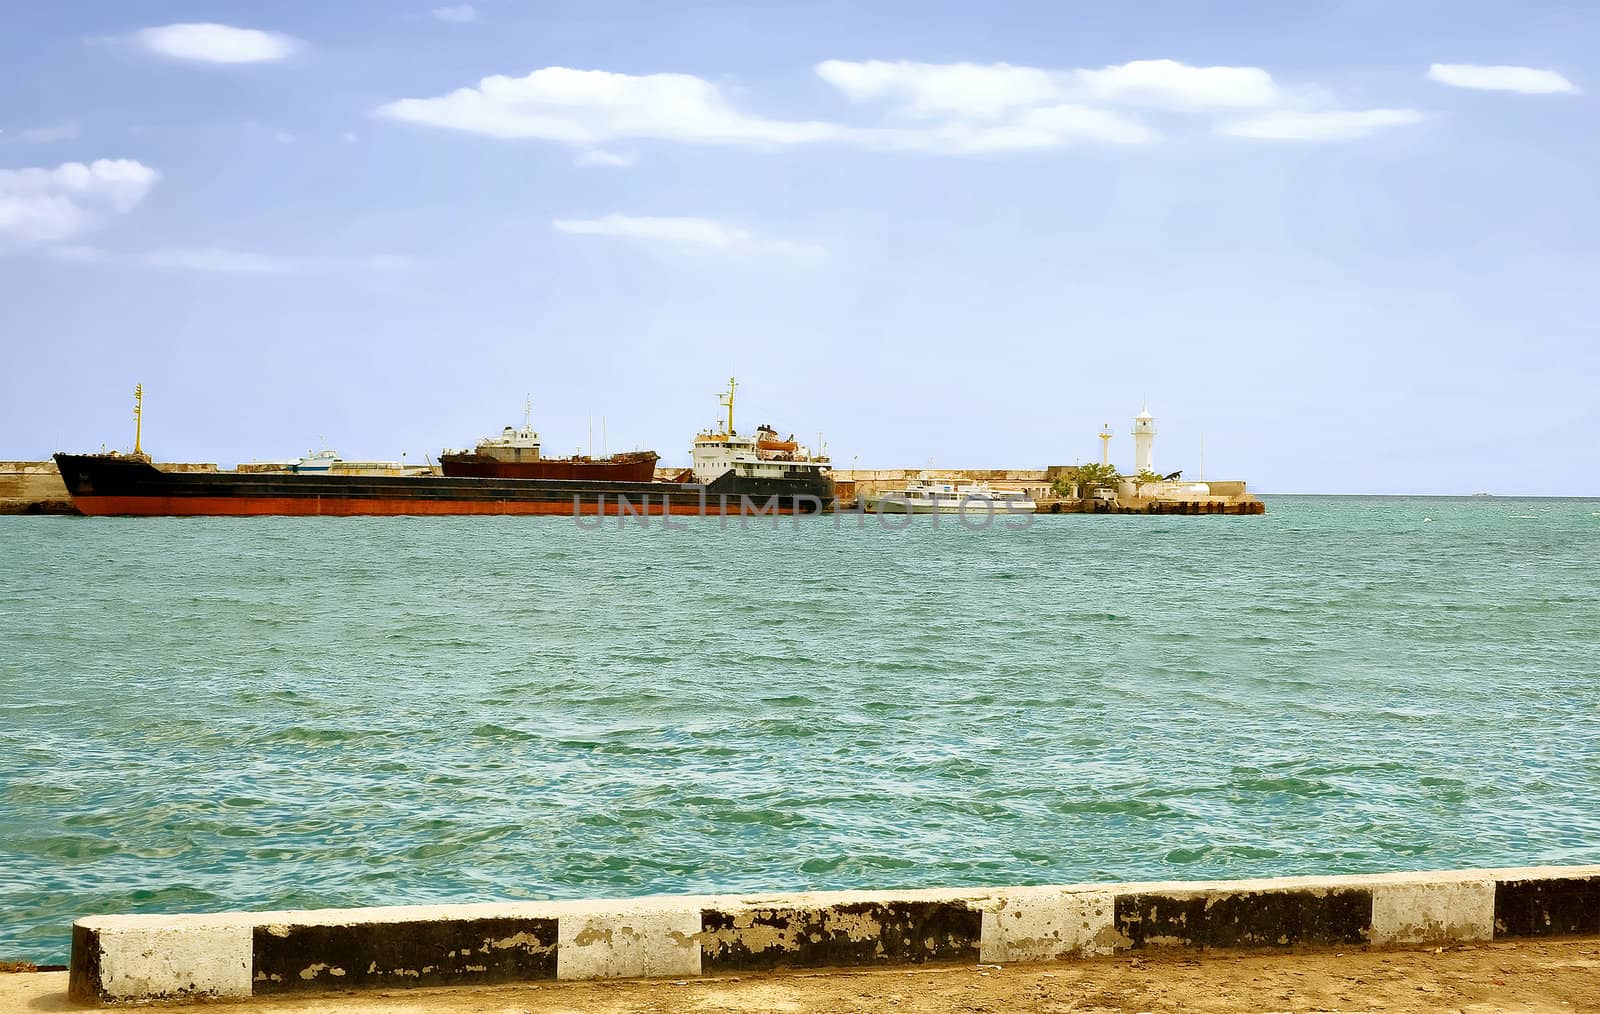 Large transport ship is far from the pier by selhin